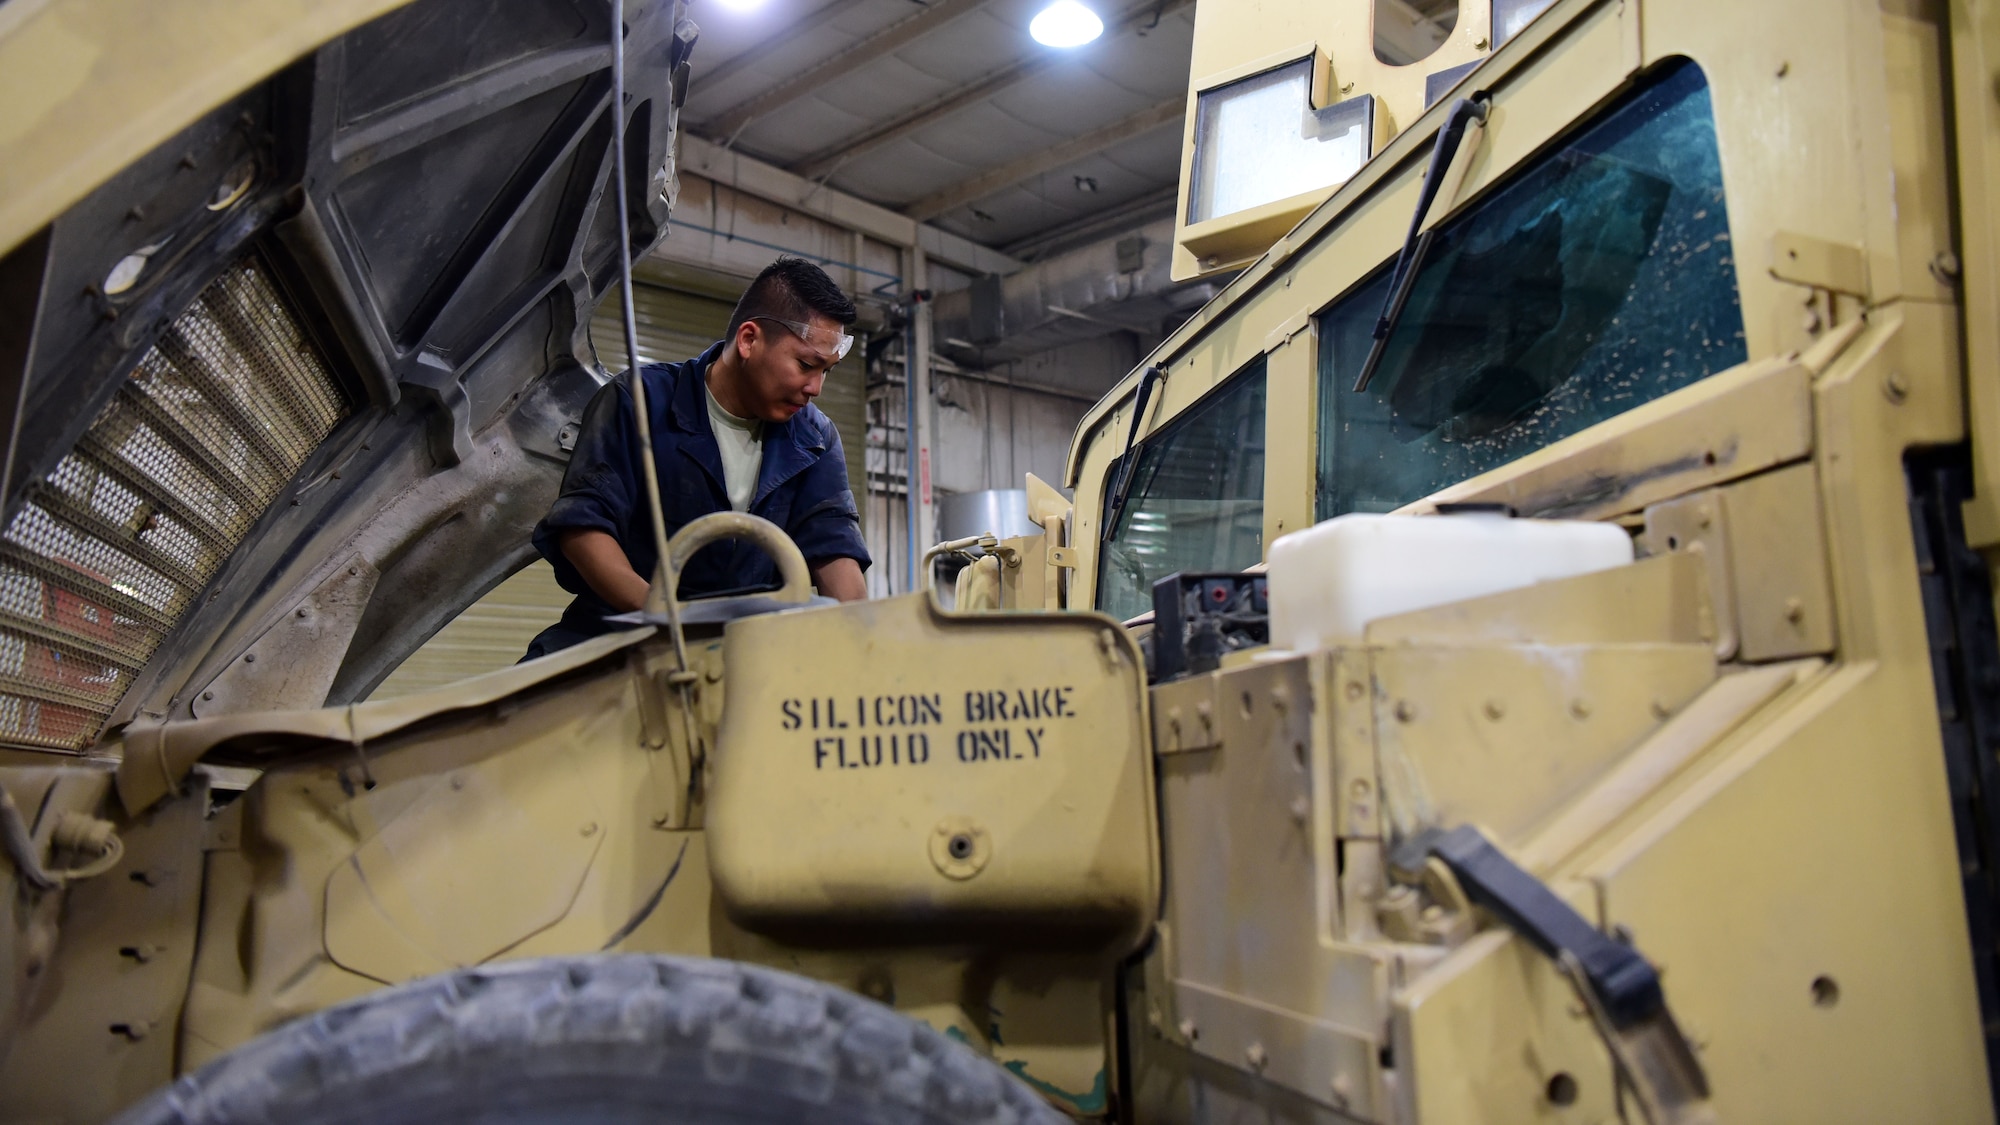 U.S. Air Force Staff Sgt. Denmark Castrence, 386th Expeditionary Logistics Readiness Squadron vehicle mechanic, inspects the engine bay of a Humvee Aug. 14, 2018, at an undisclosed location in Southwest Asia. Castrence and his team have been working with U.S. Army Fox Company 227 to maintain their occupational proficiency in addition to completing the mission. (U.S. Air Force photo by Staff Sgt. Christopher Stoltz)